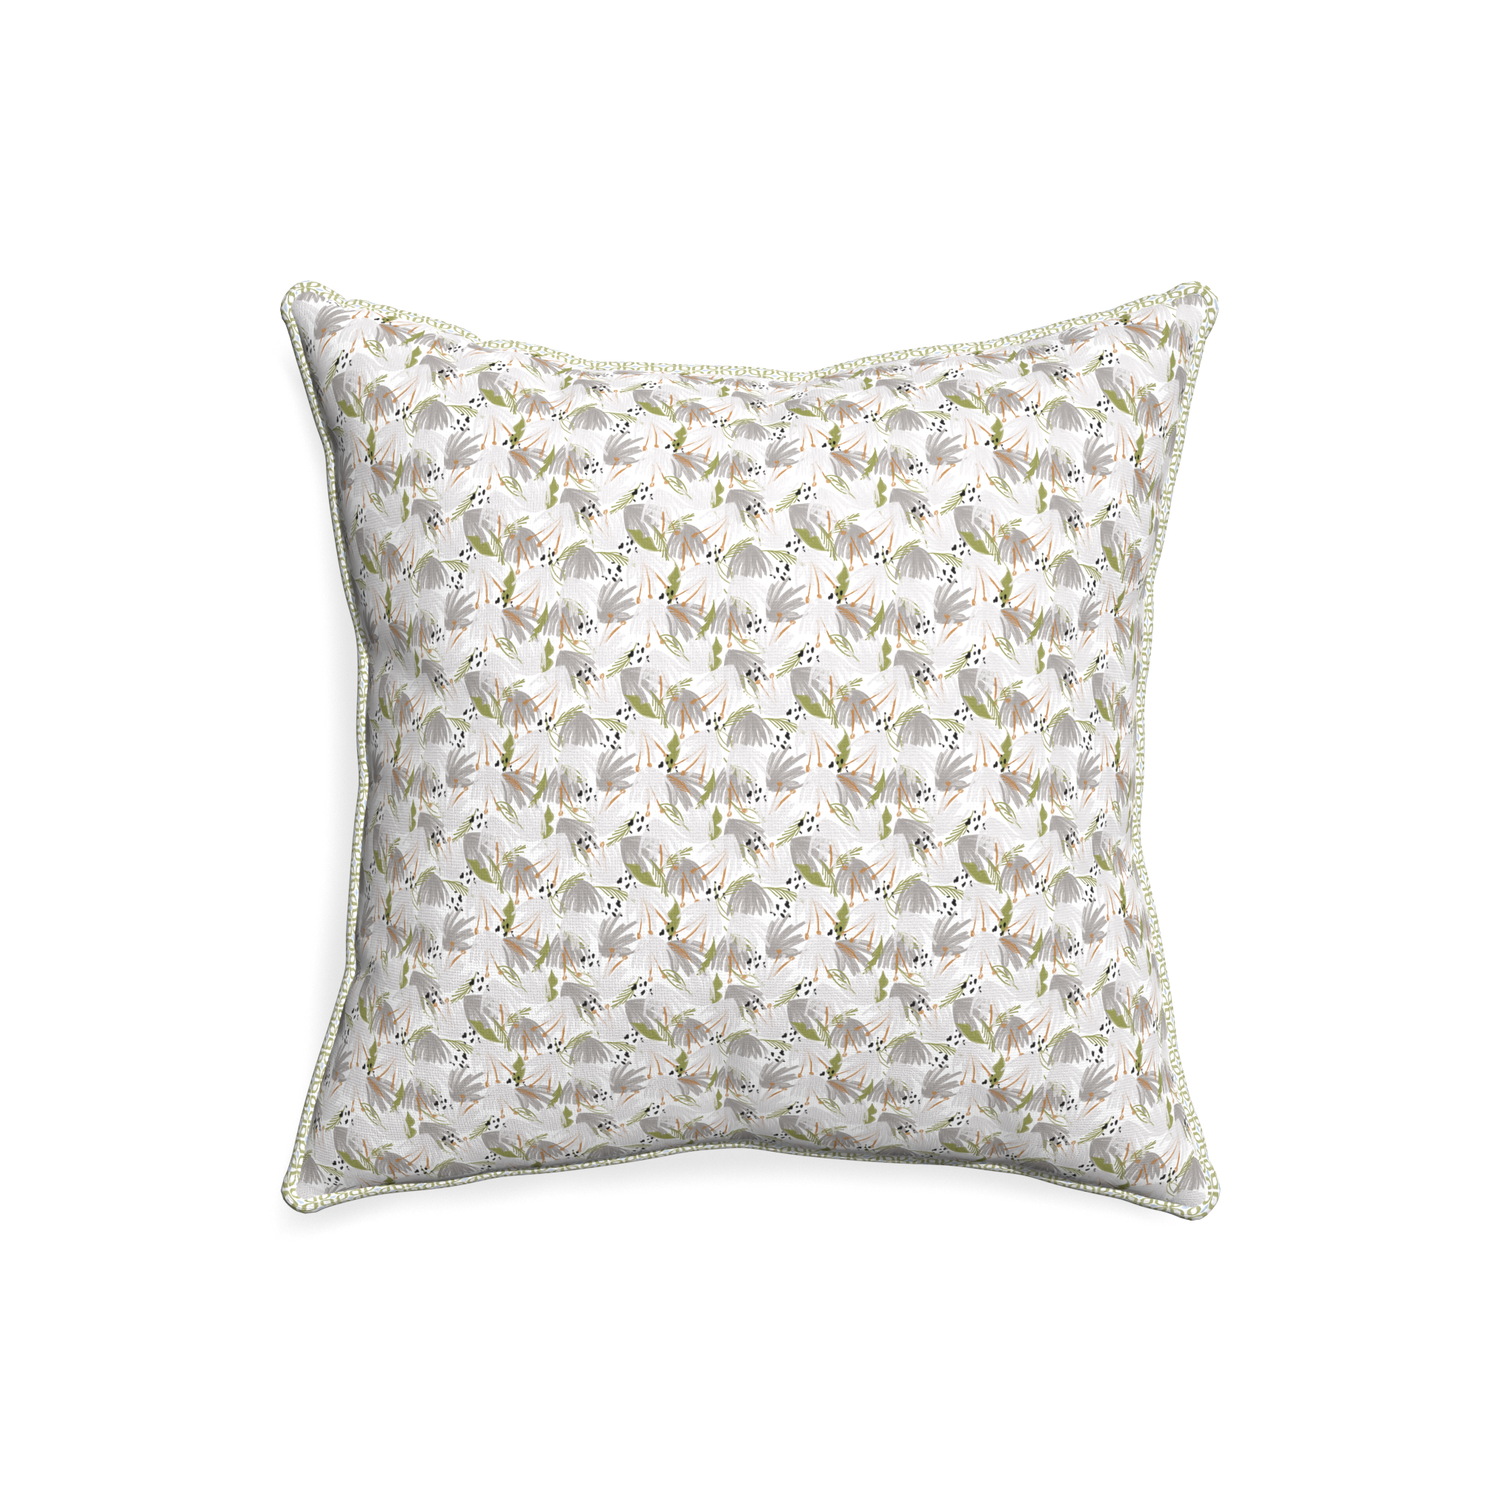 20-square eden grey custom grey floralpillow with l piping on white background